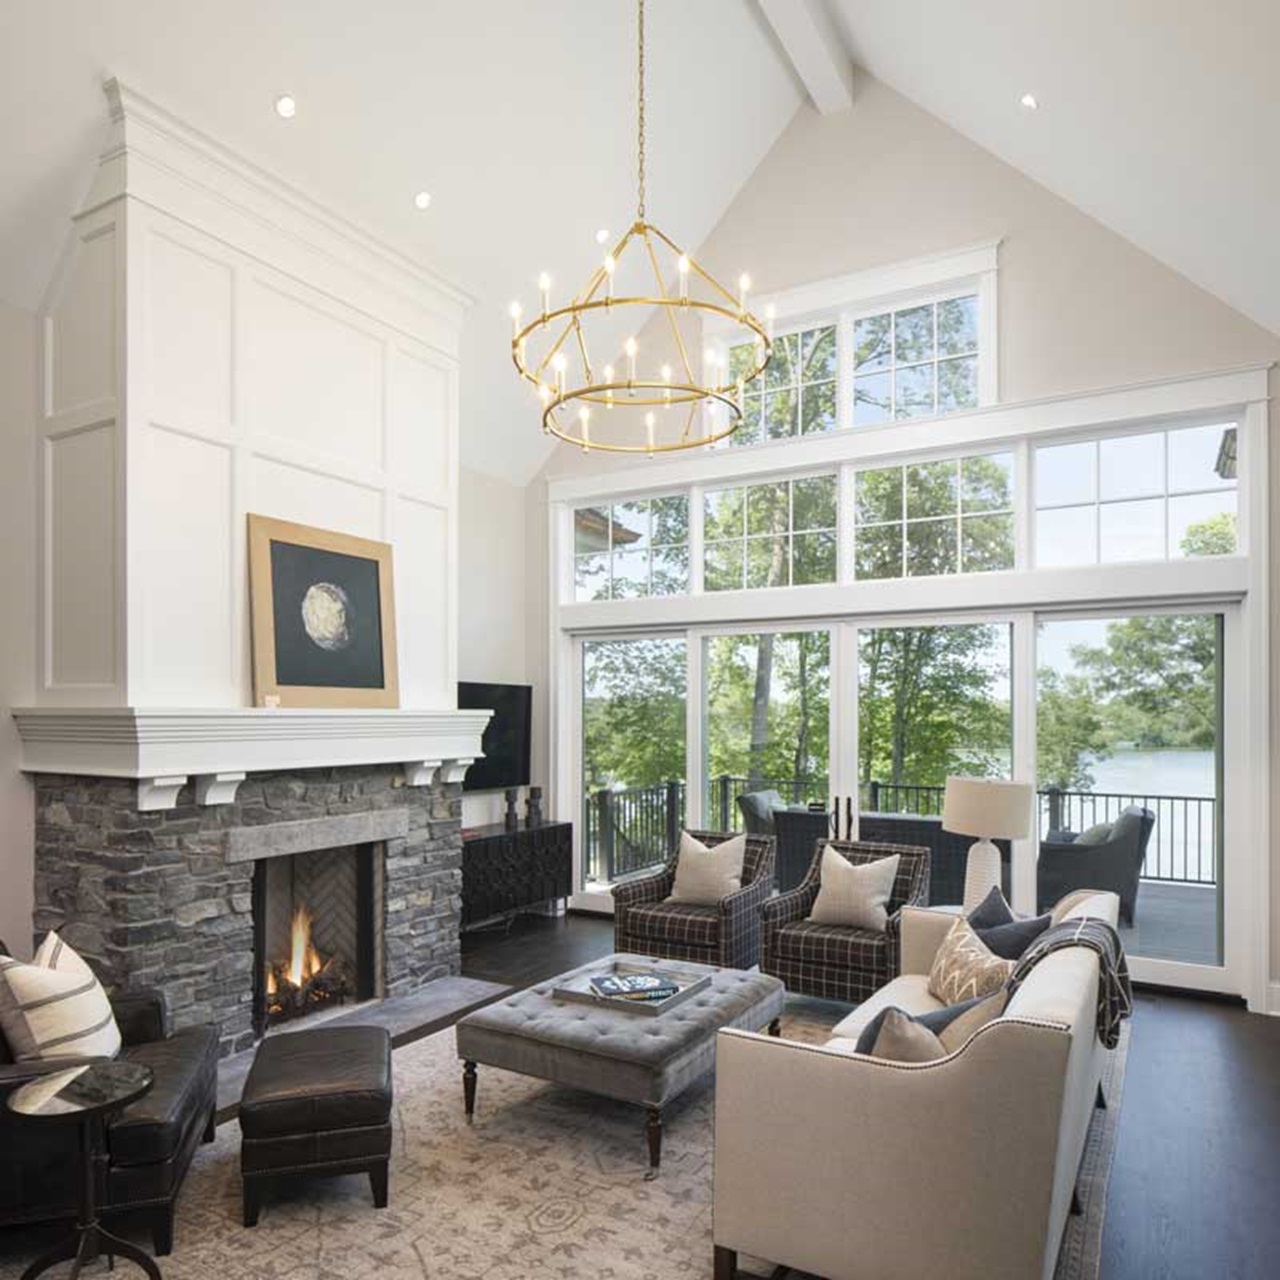 Living room with fireplace and vaulted ceilings with a lake view through sliding french doors